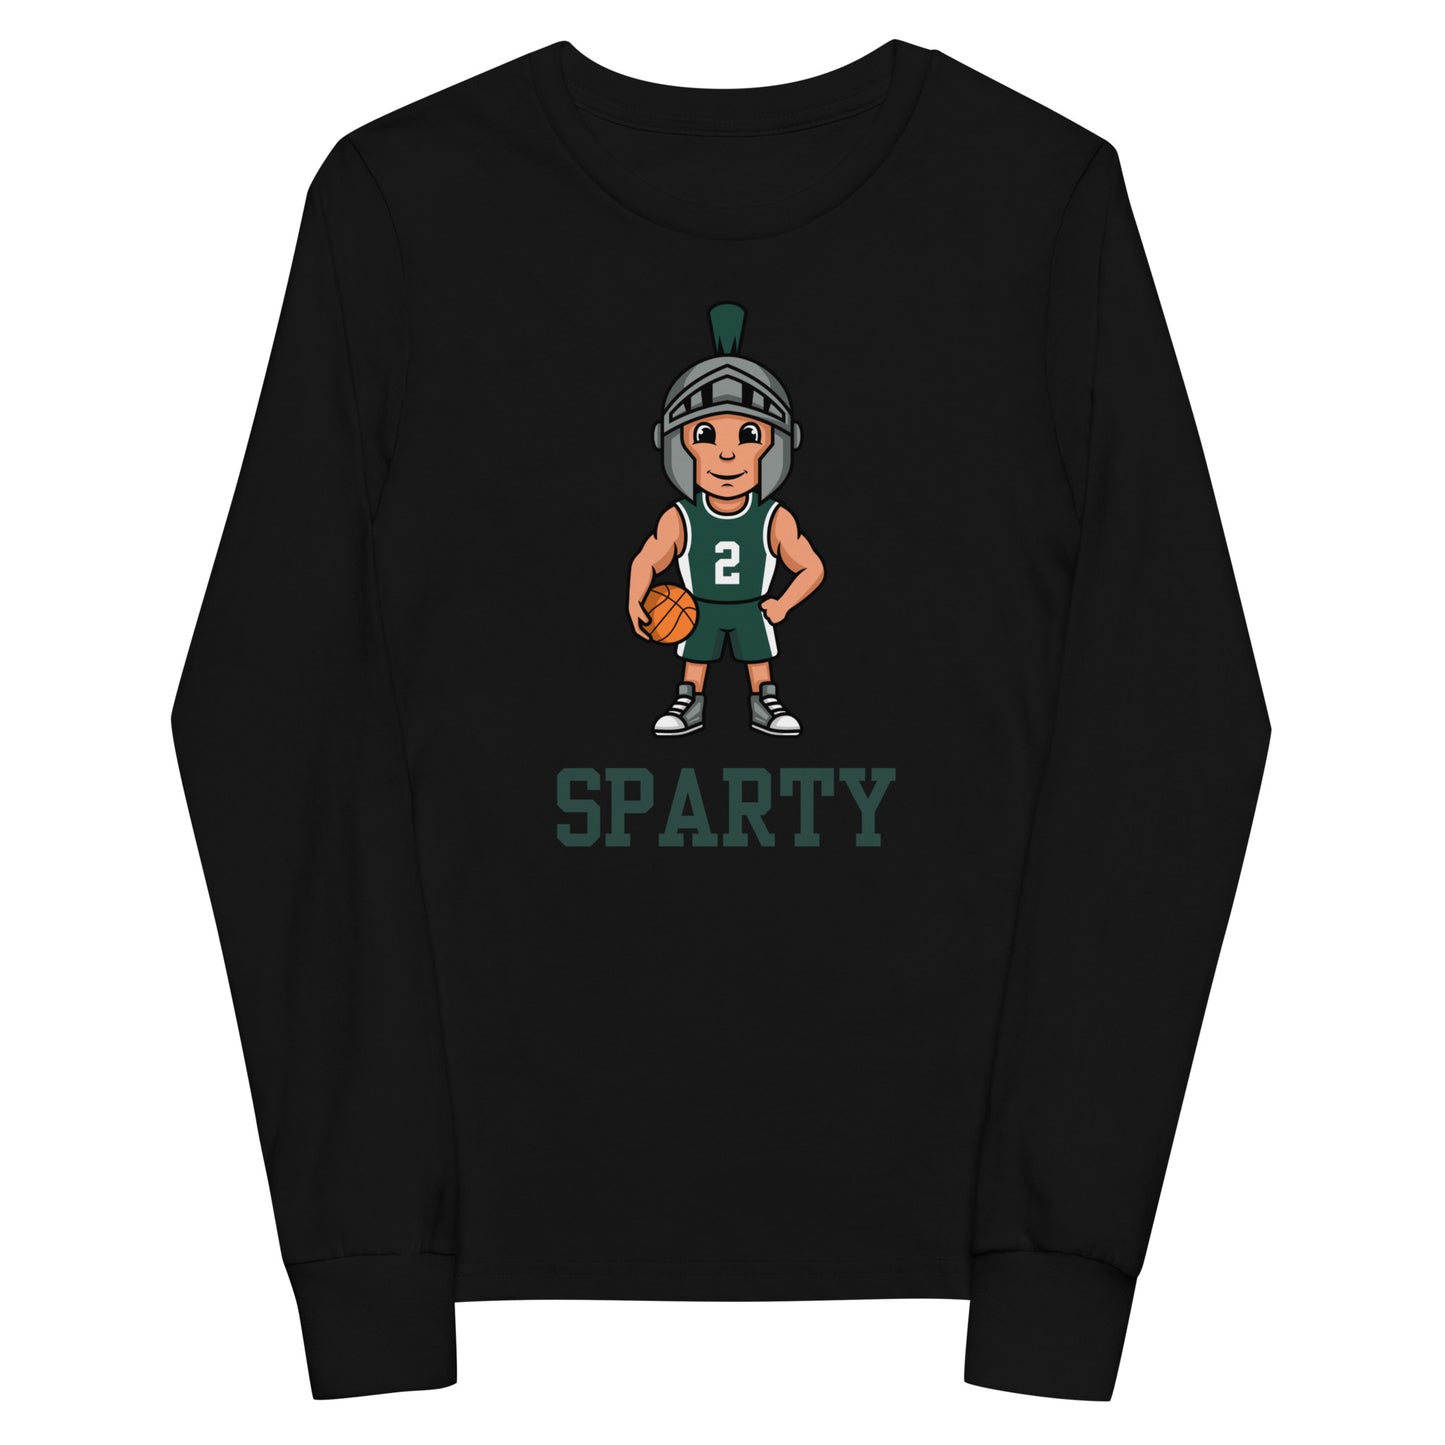 Sparty Youth long sleeve tee